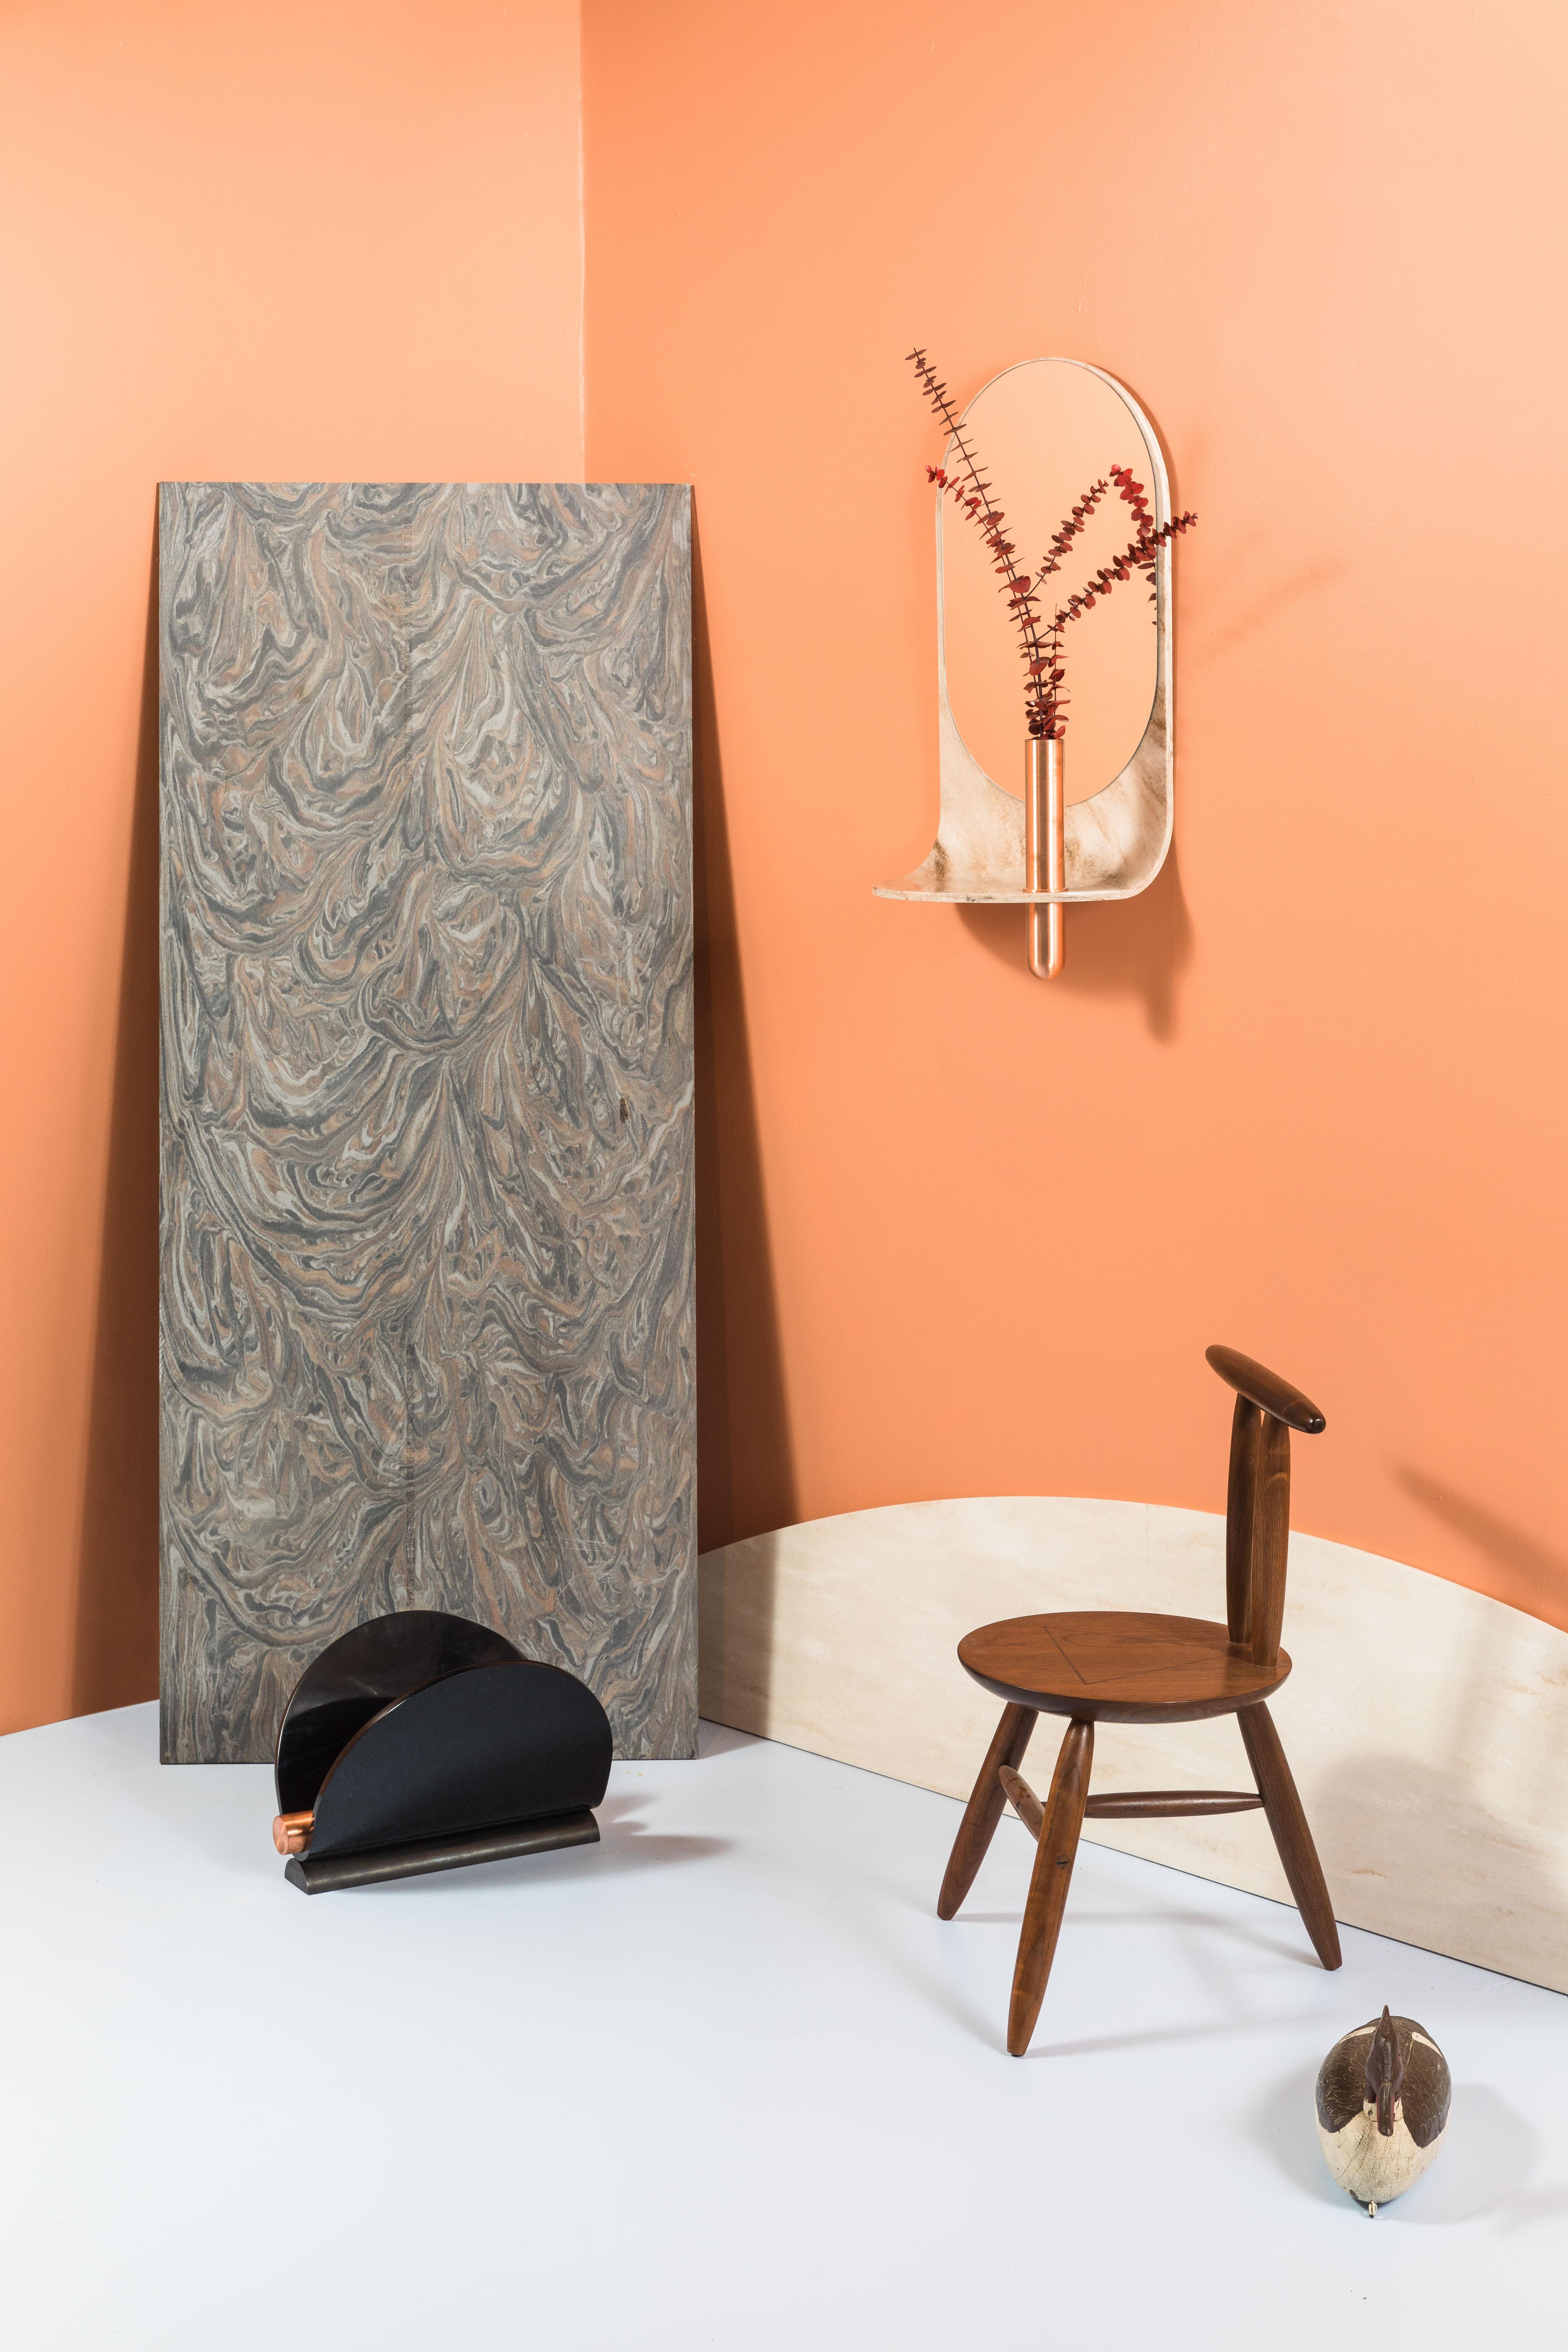 Other Swoop Mirror in Curved Stone with Copper Vase by Birnam Wood Studio